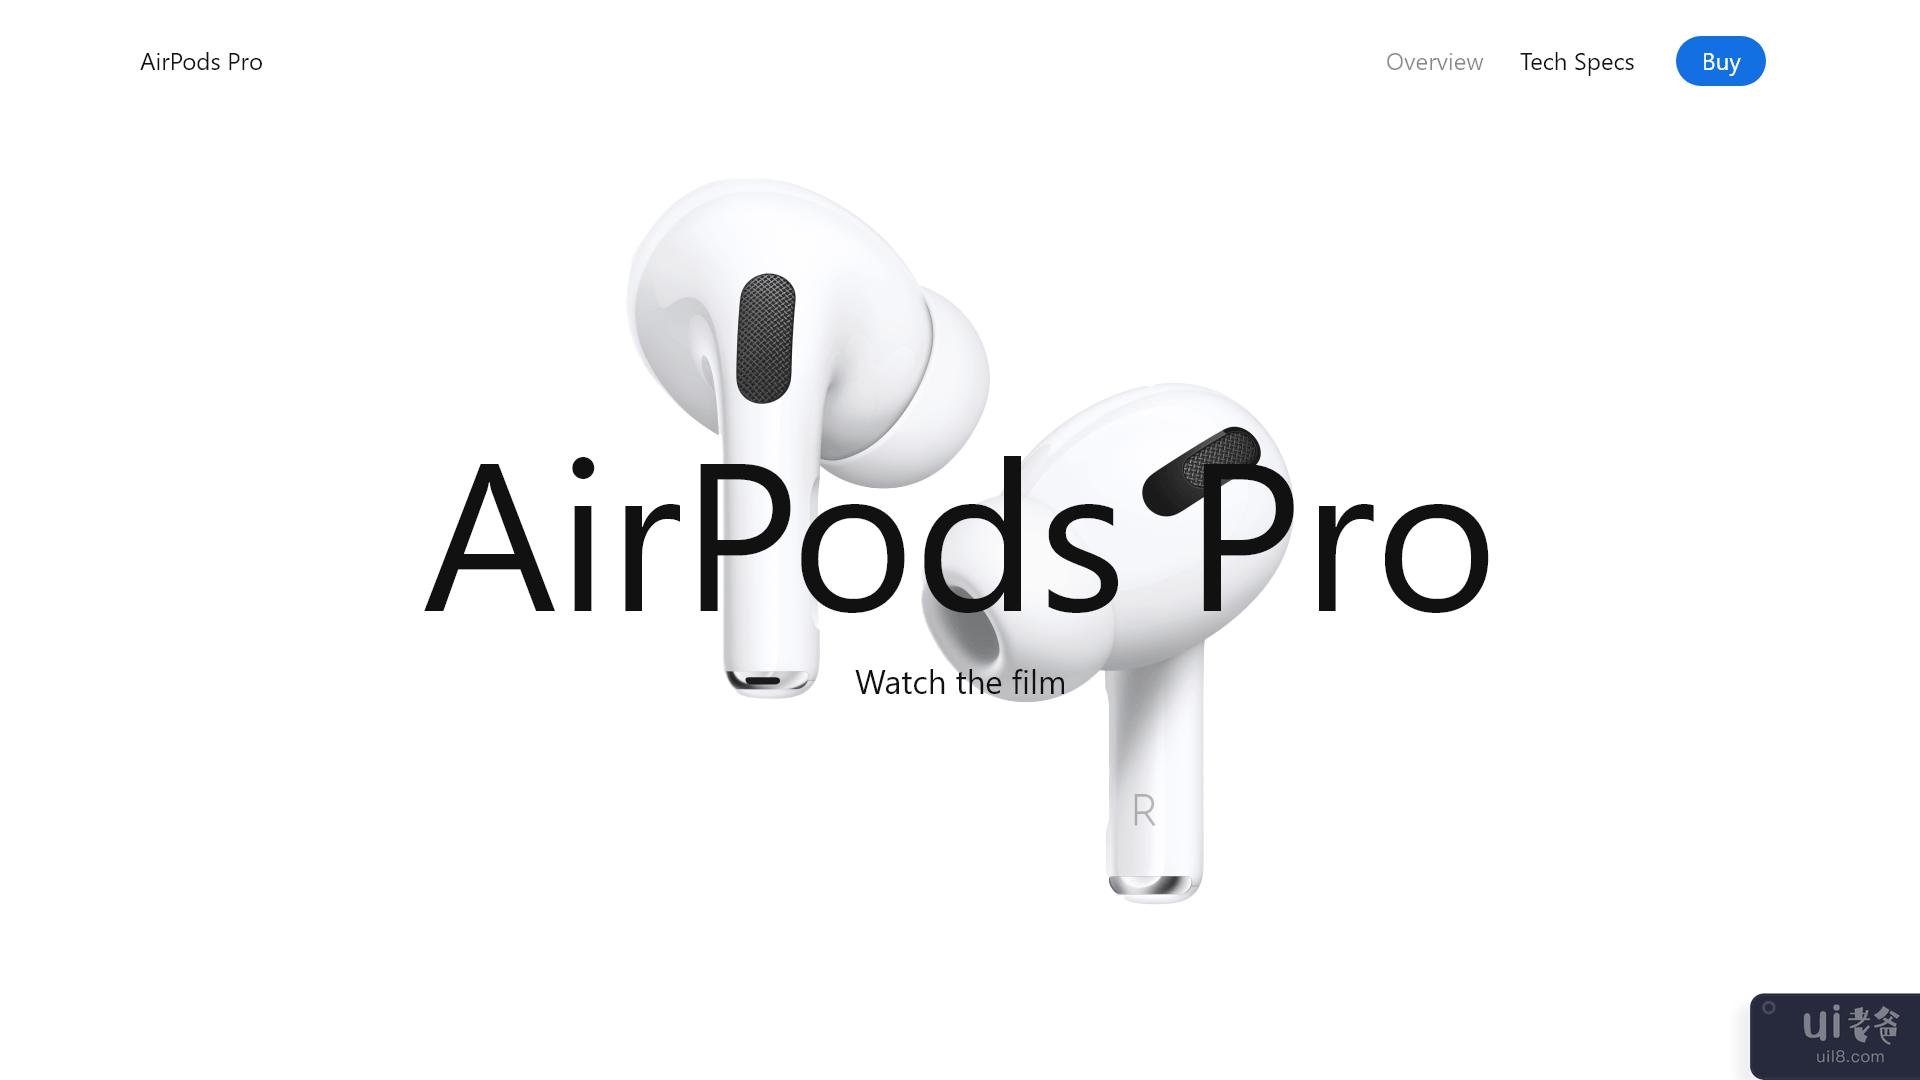 AirPods Pro 网页版(AirPods Pro Web)插图2